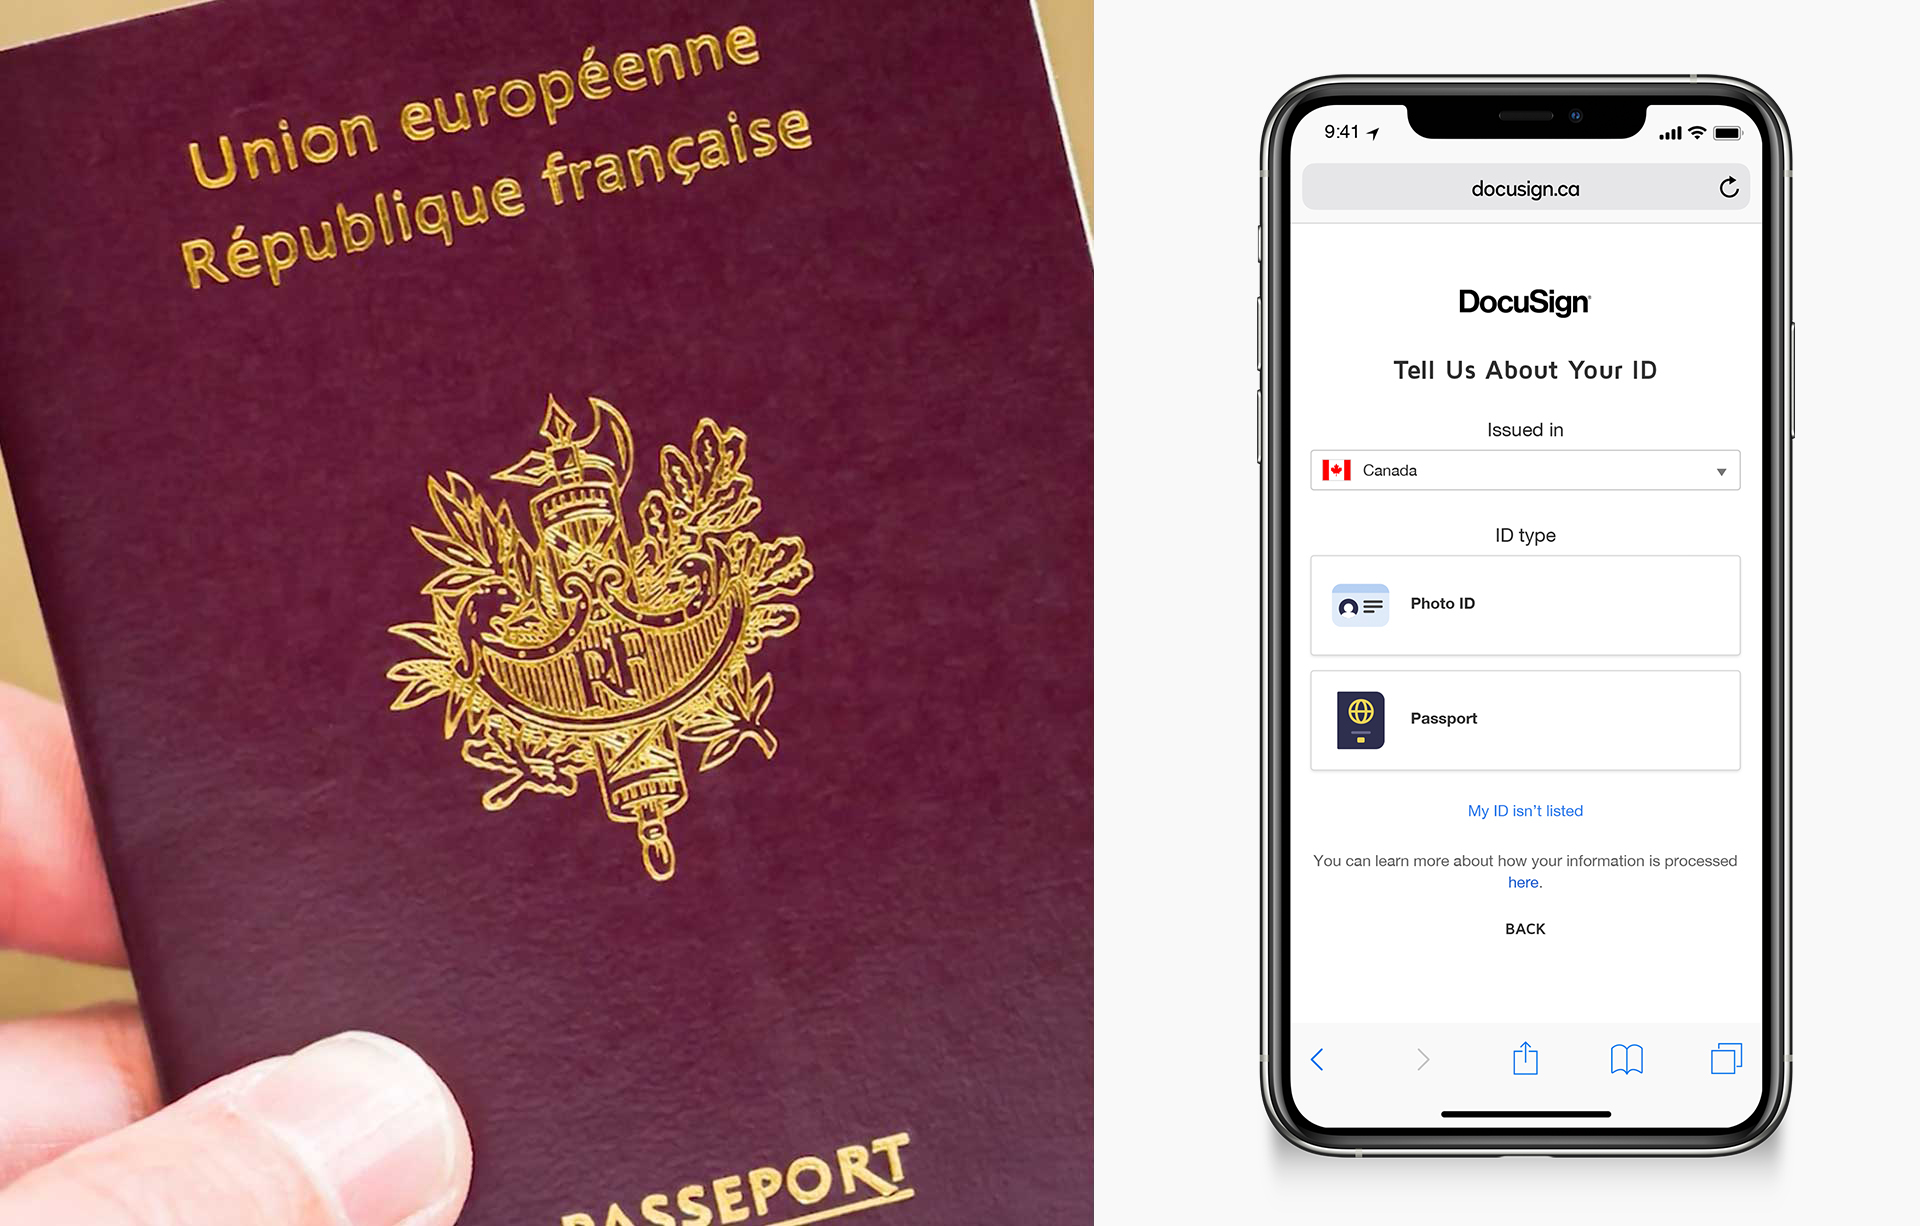 A split image showing a hand holding a passport on the left and on the right a phone prompting to "Tell us about your ID"